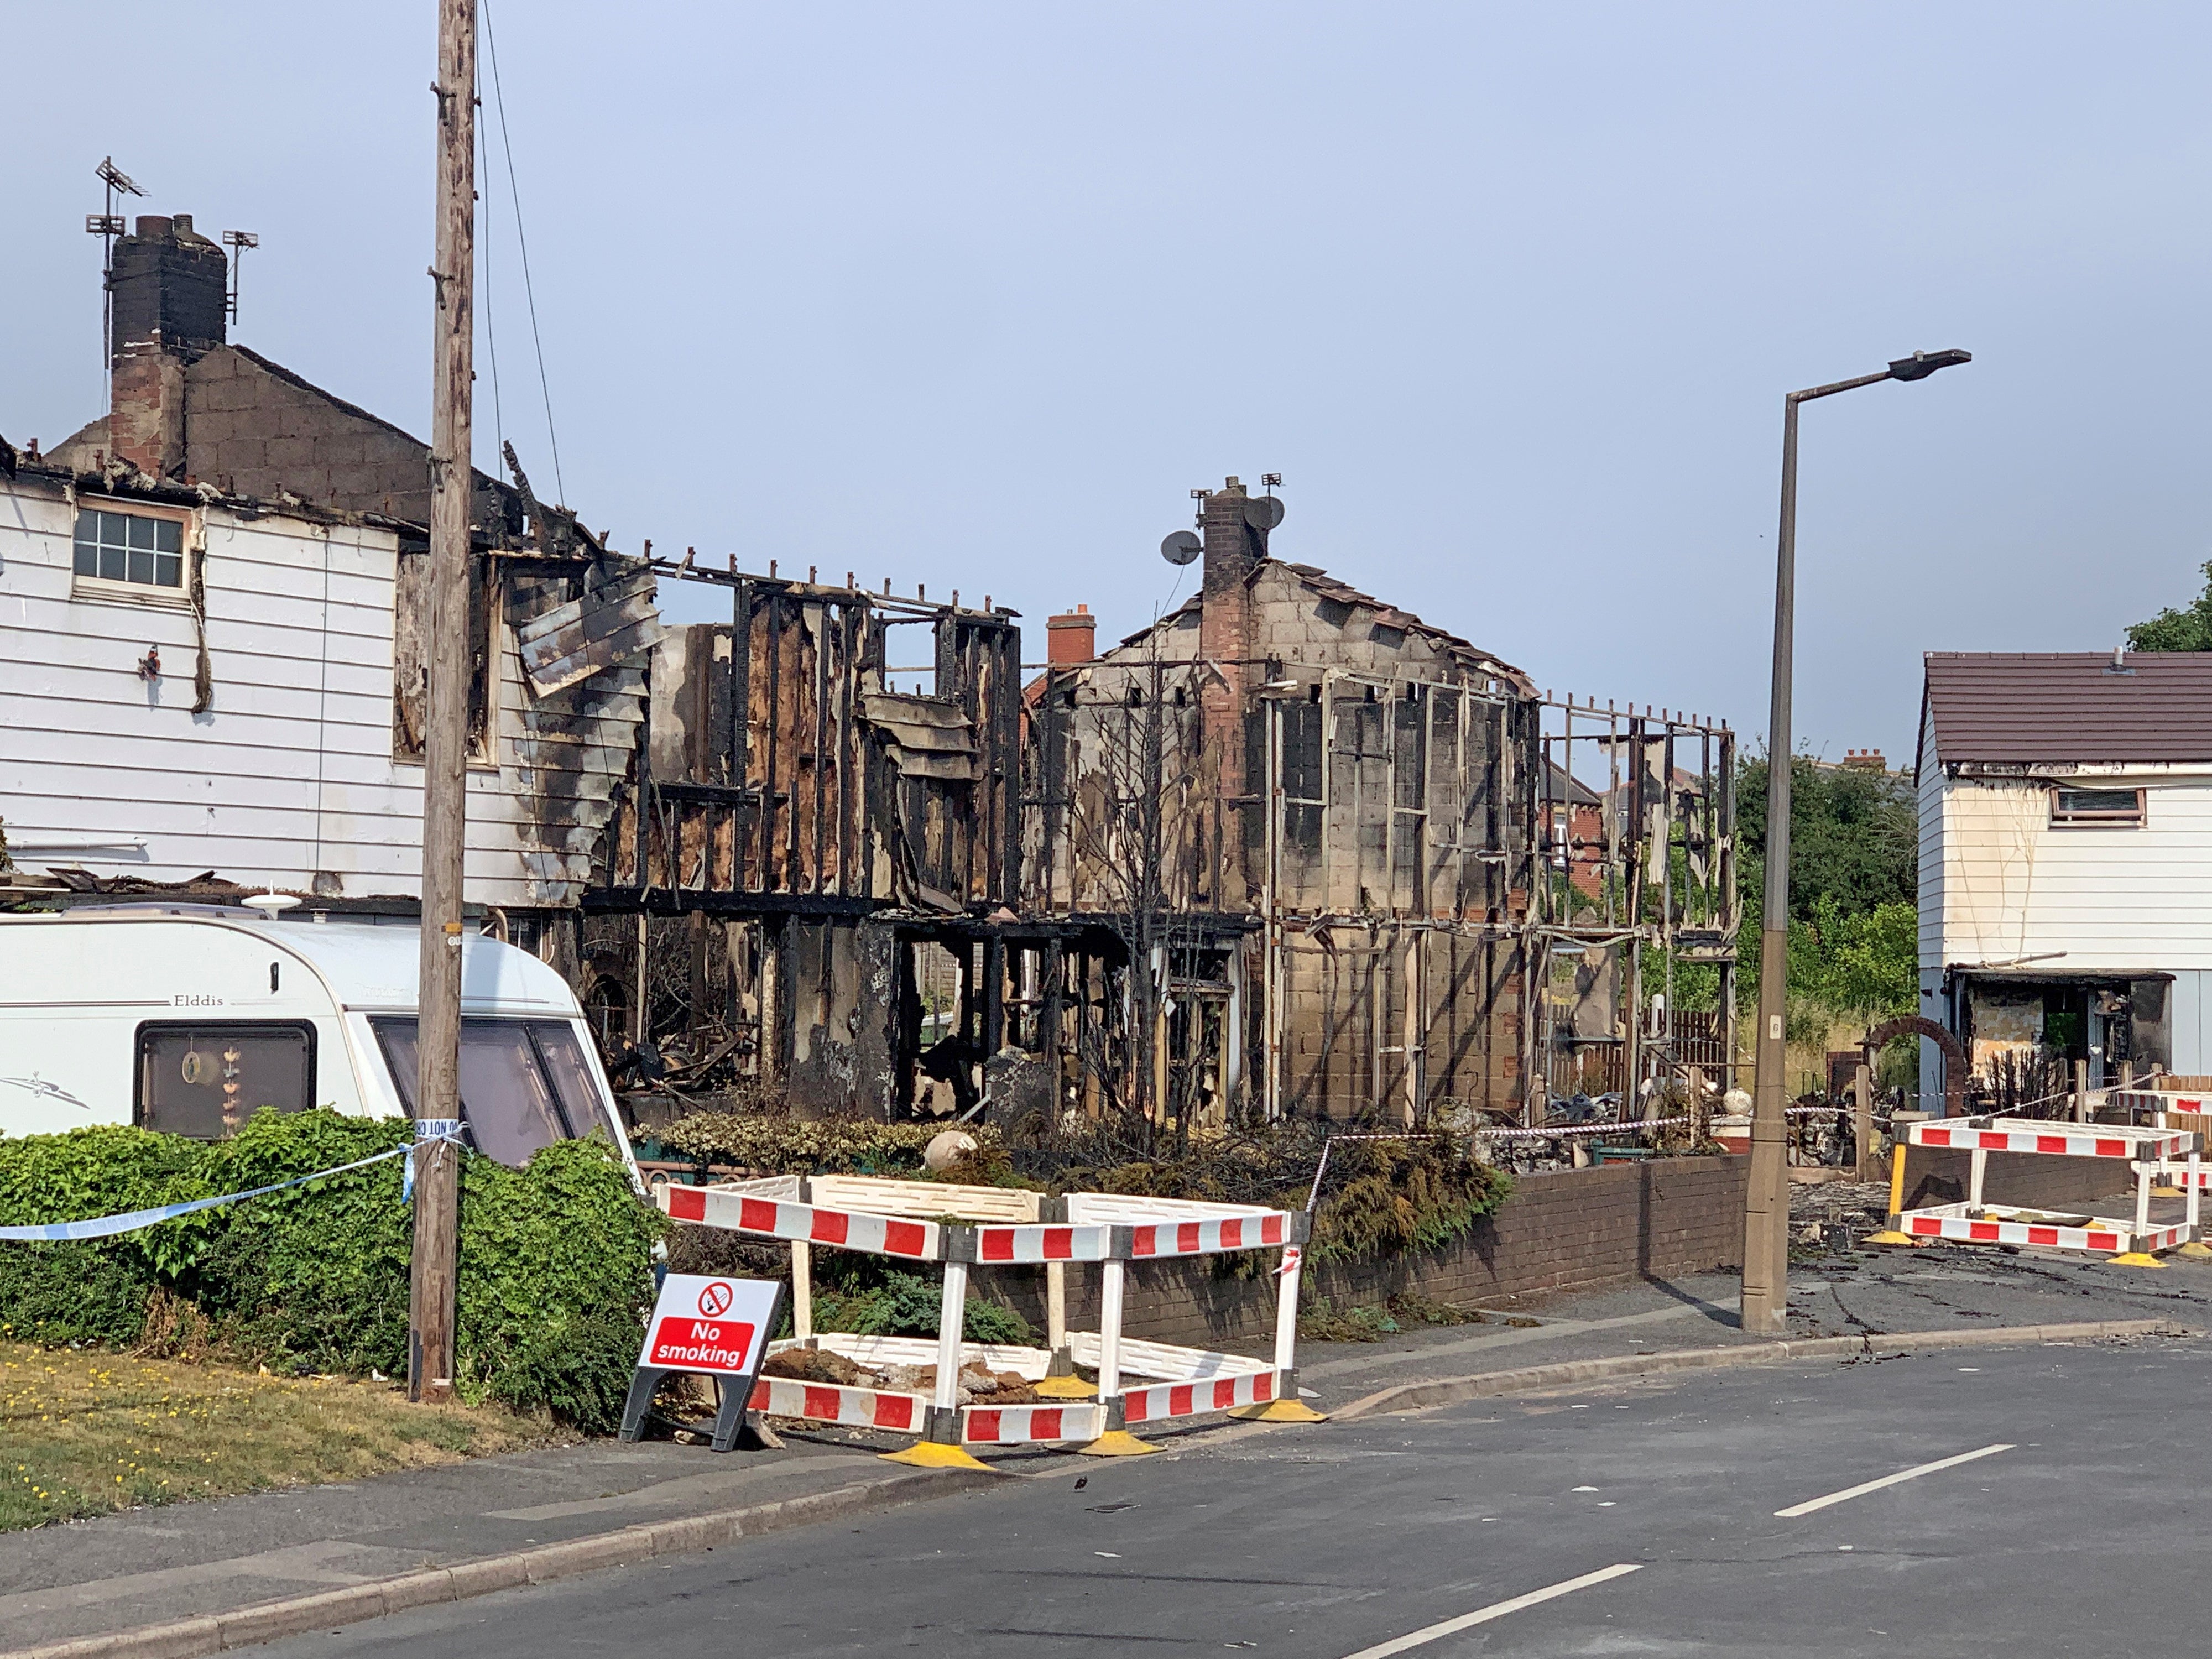 The scene after a blaze in Barnsley, South Yorkshire (Dave Higgens/PA)